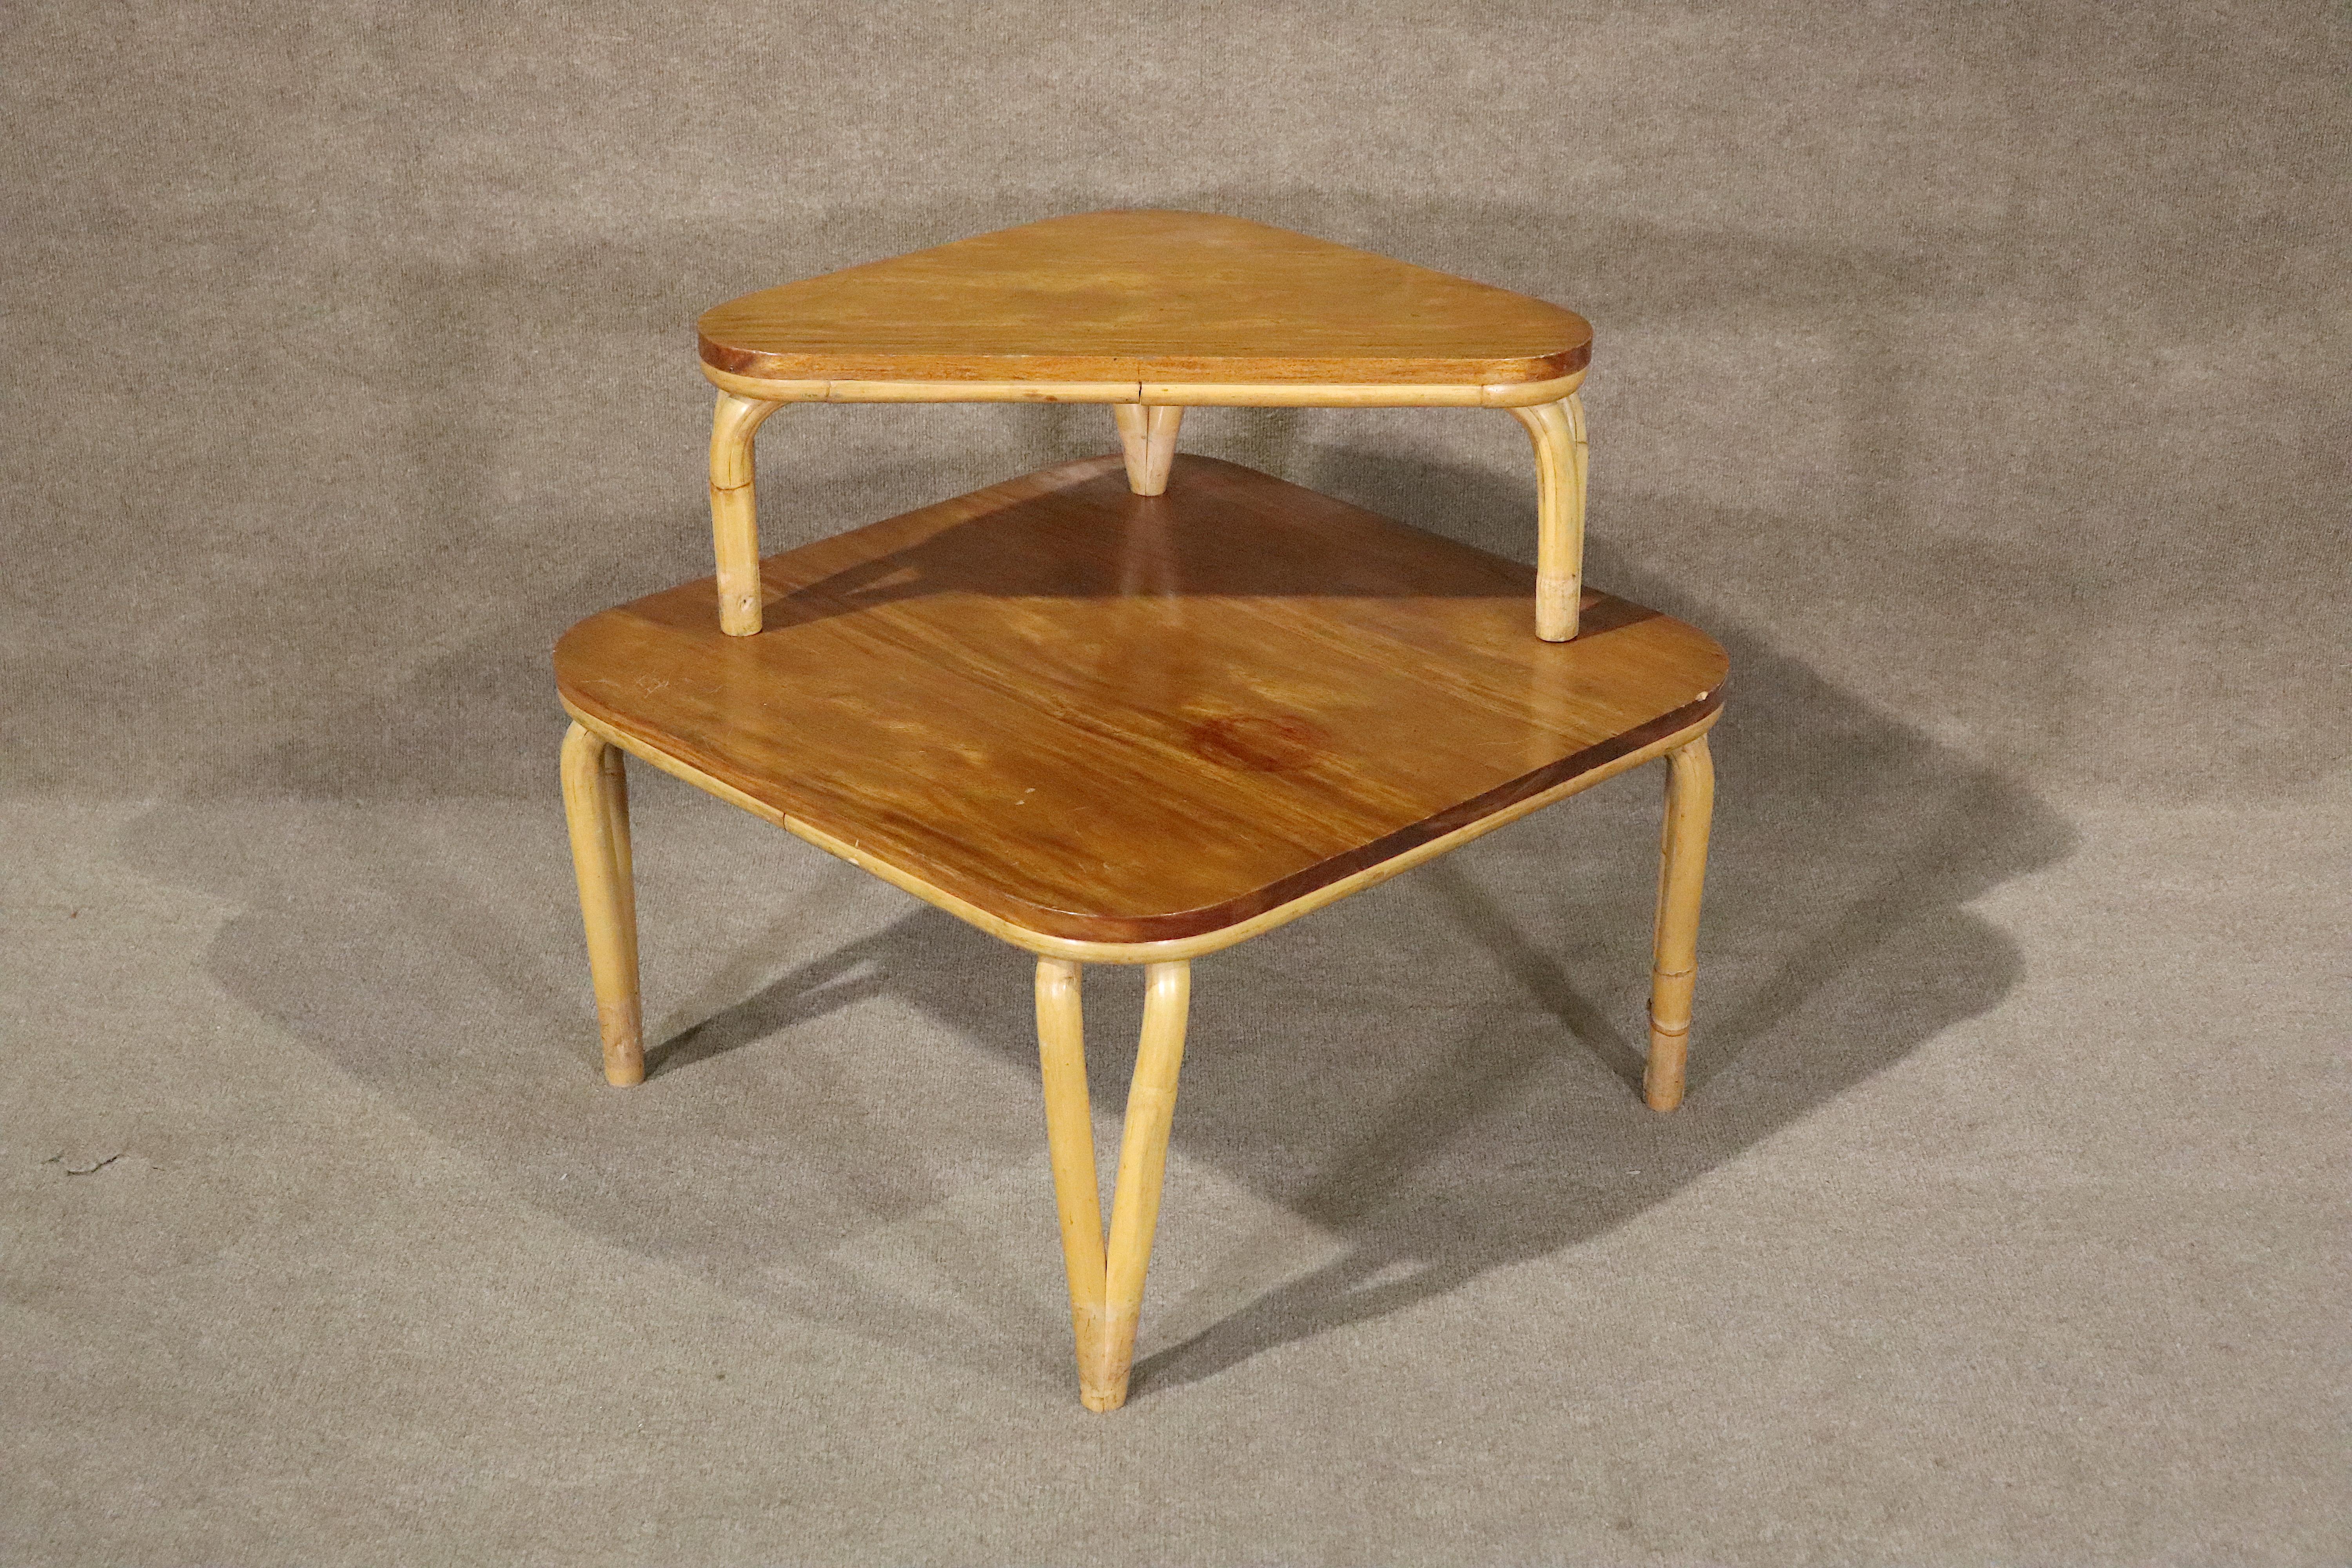 Mid-century corner table in bamboo and mahogany with tiered top. Top is removable.
Please confirm location NY or NJ